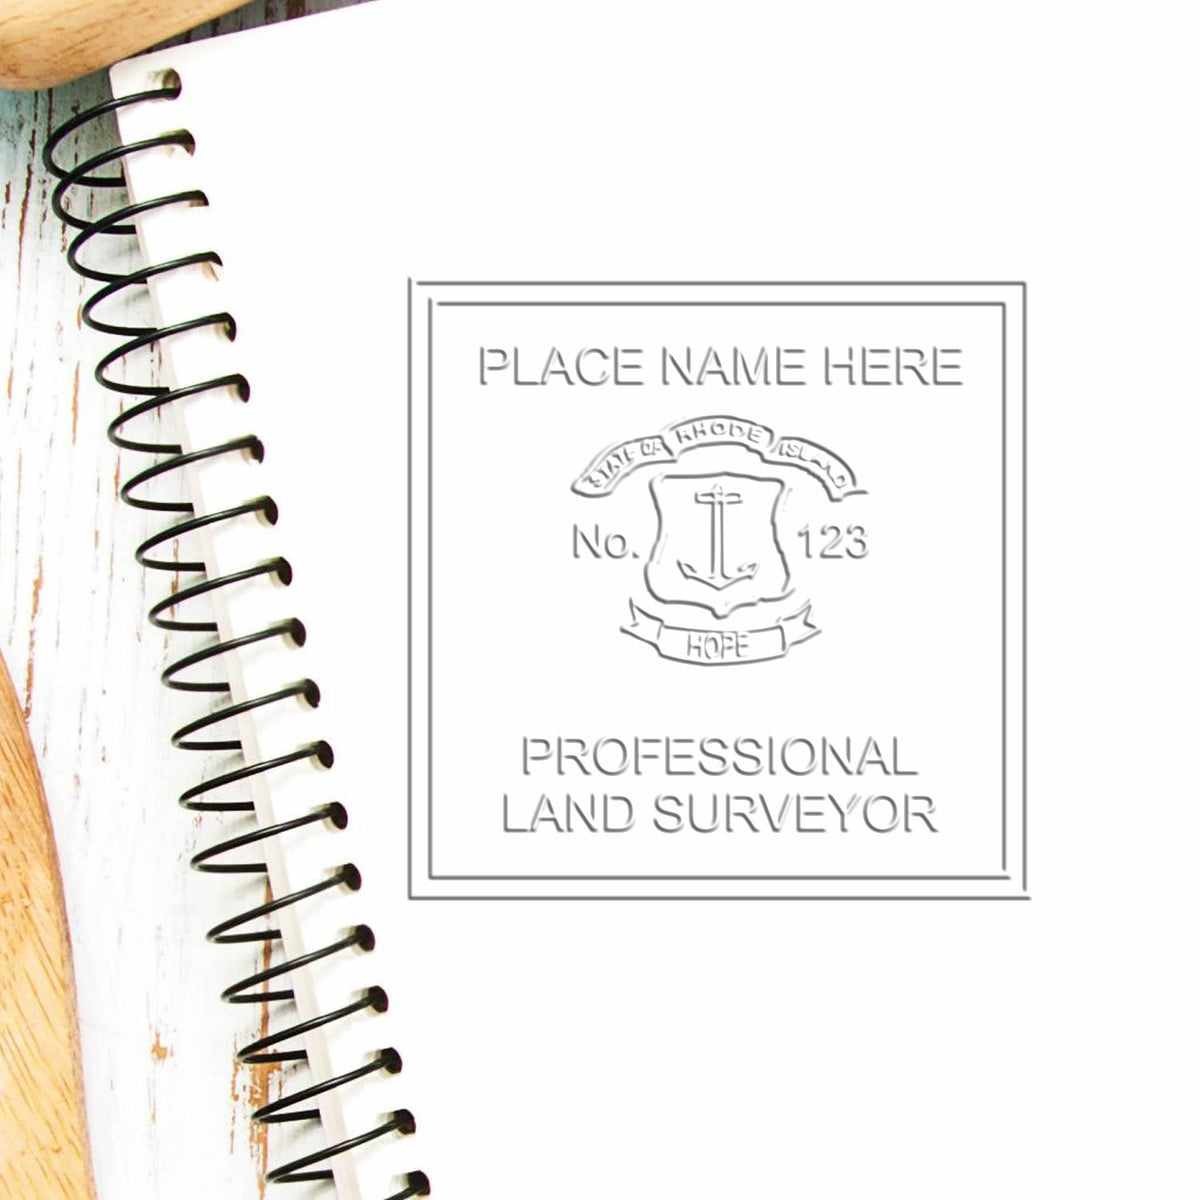 The Gift Rhode Island Land Surveyor Seal stamp impression comes to life with a crisp, detailed image stamped on paper - showcasing true professional quality.